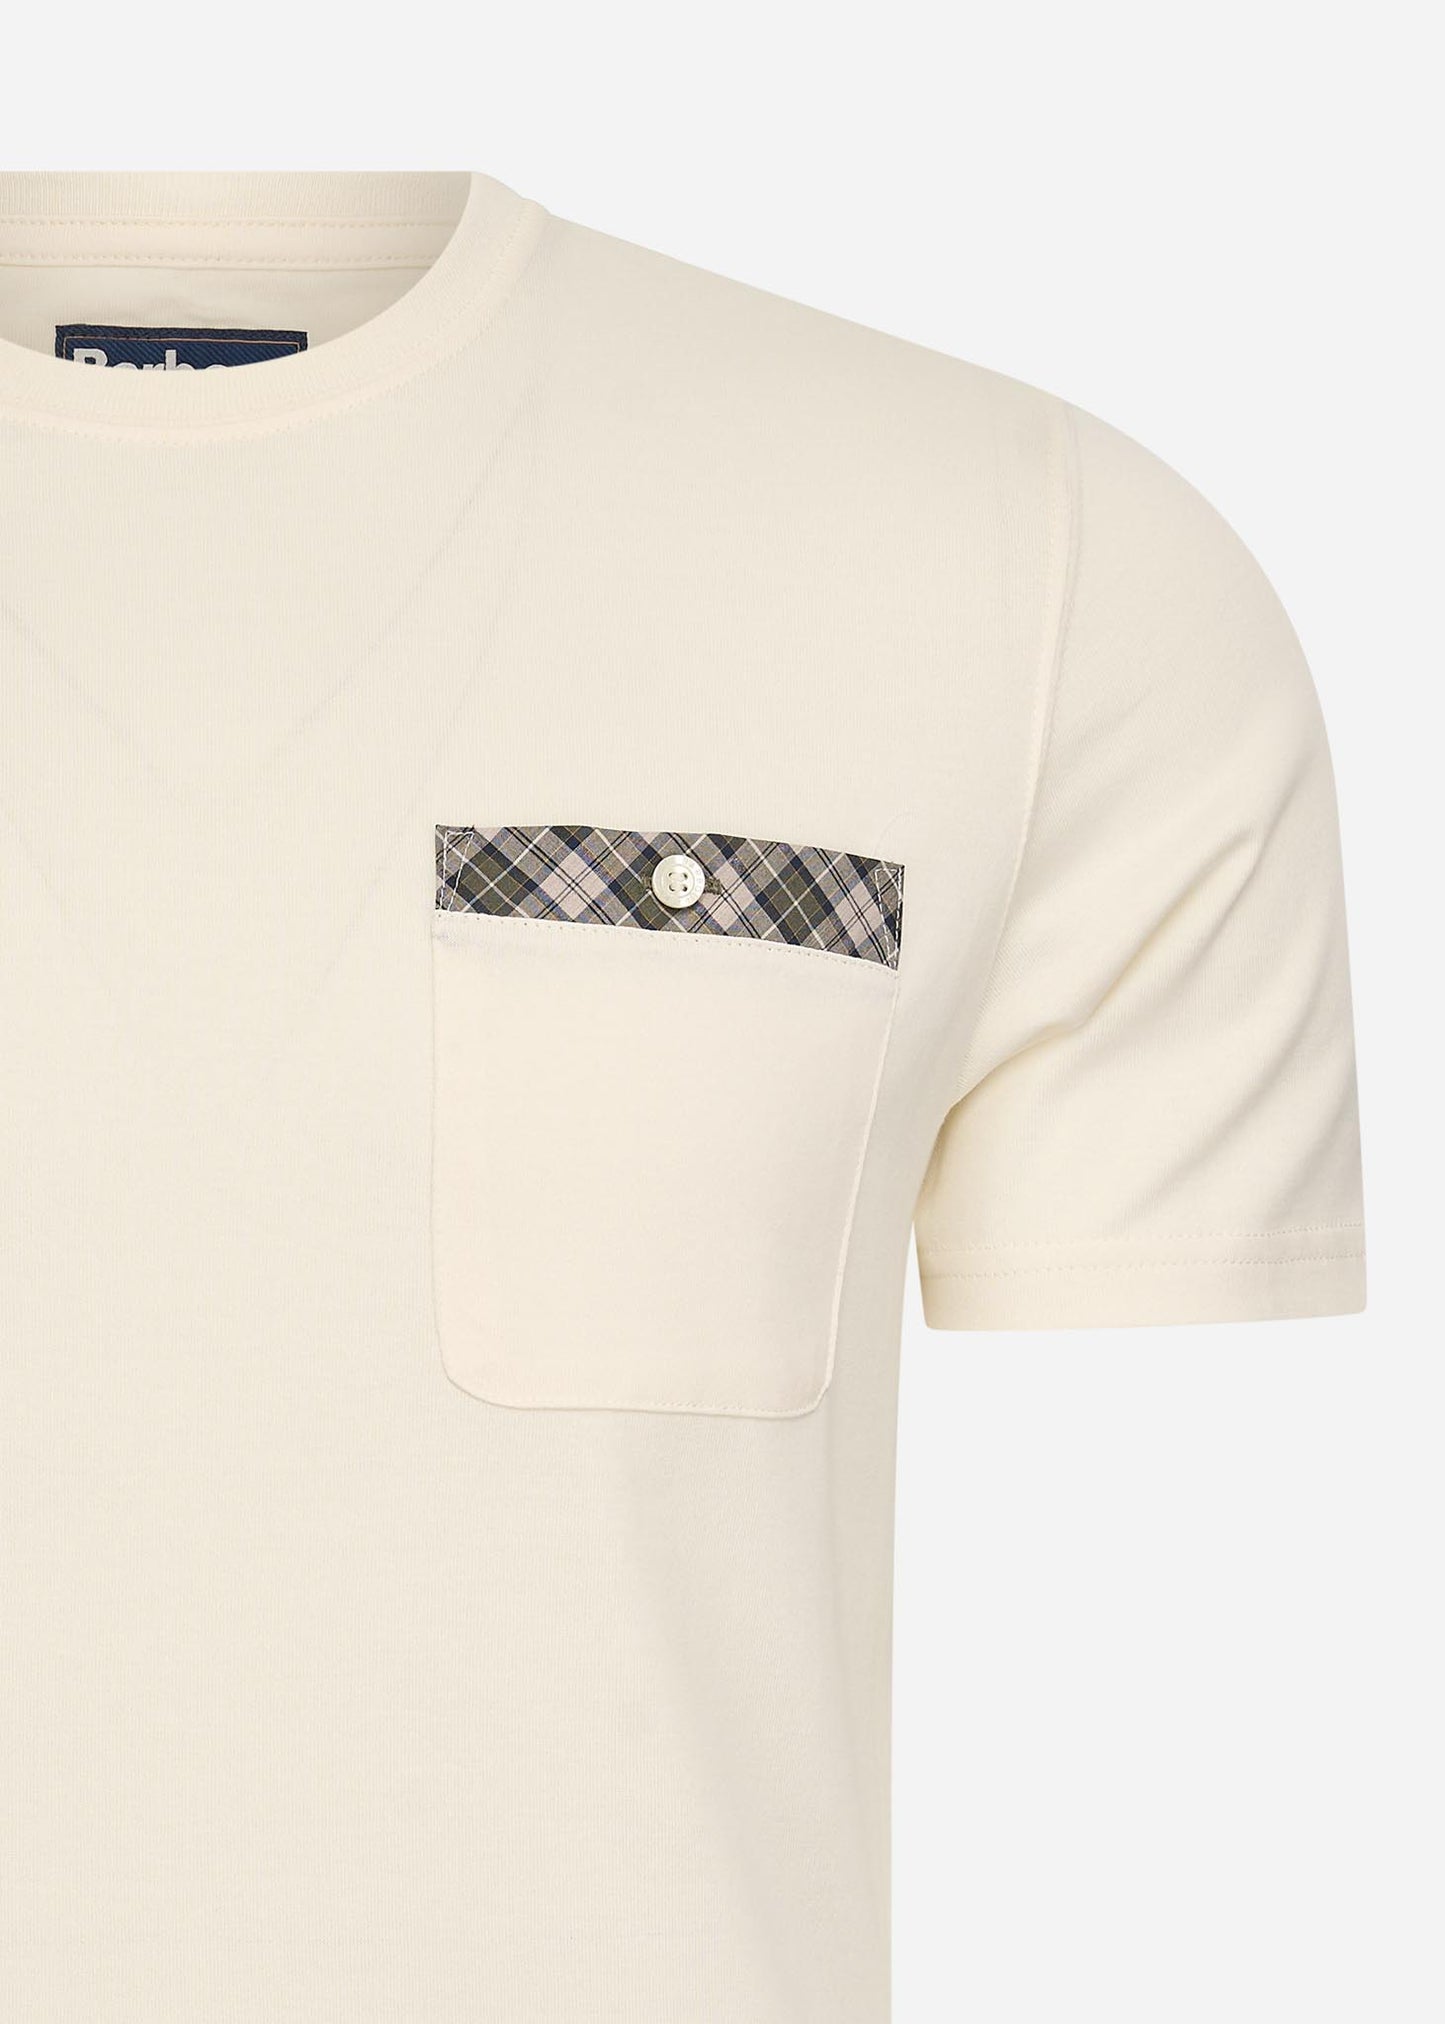 Barbour T-shirts  Durness pocket tee - whisper white 